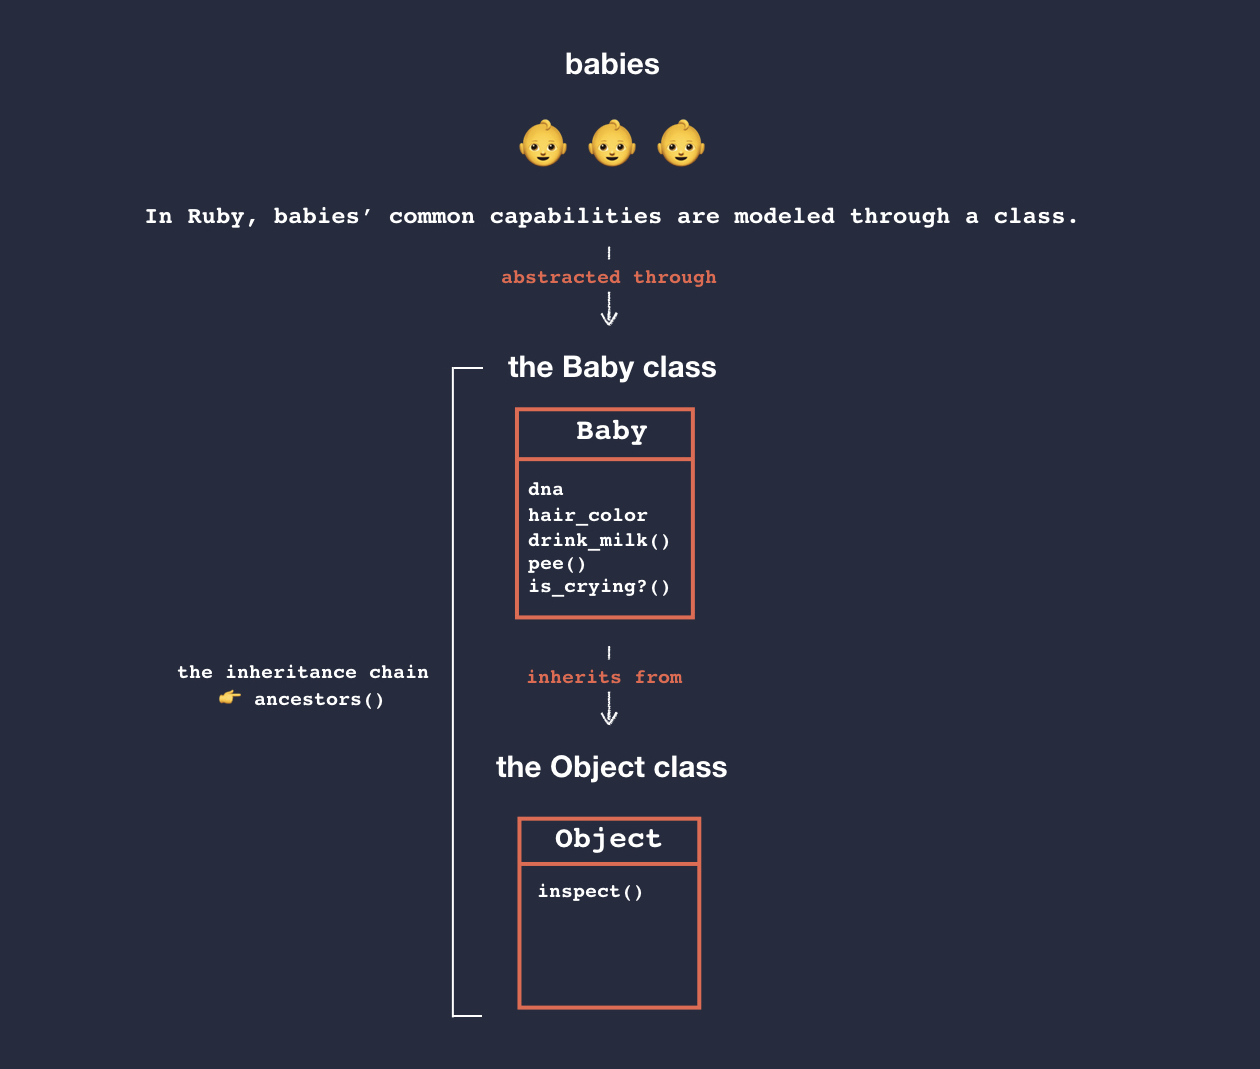 a schema explaining how babies common data types and behaviors can be modeled through a Ruby class which inherits from the root Object class